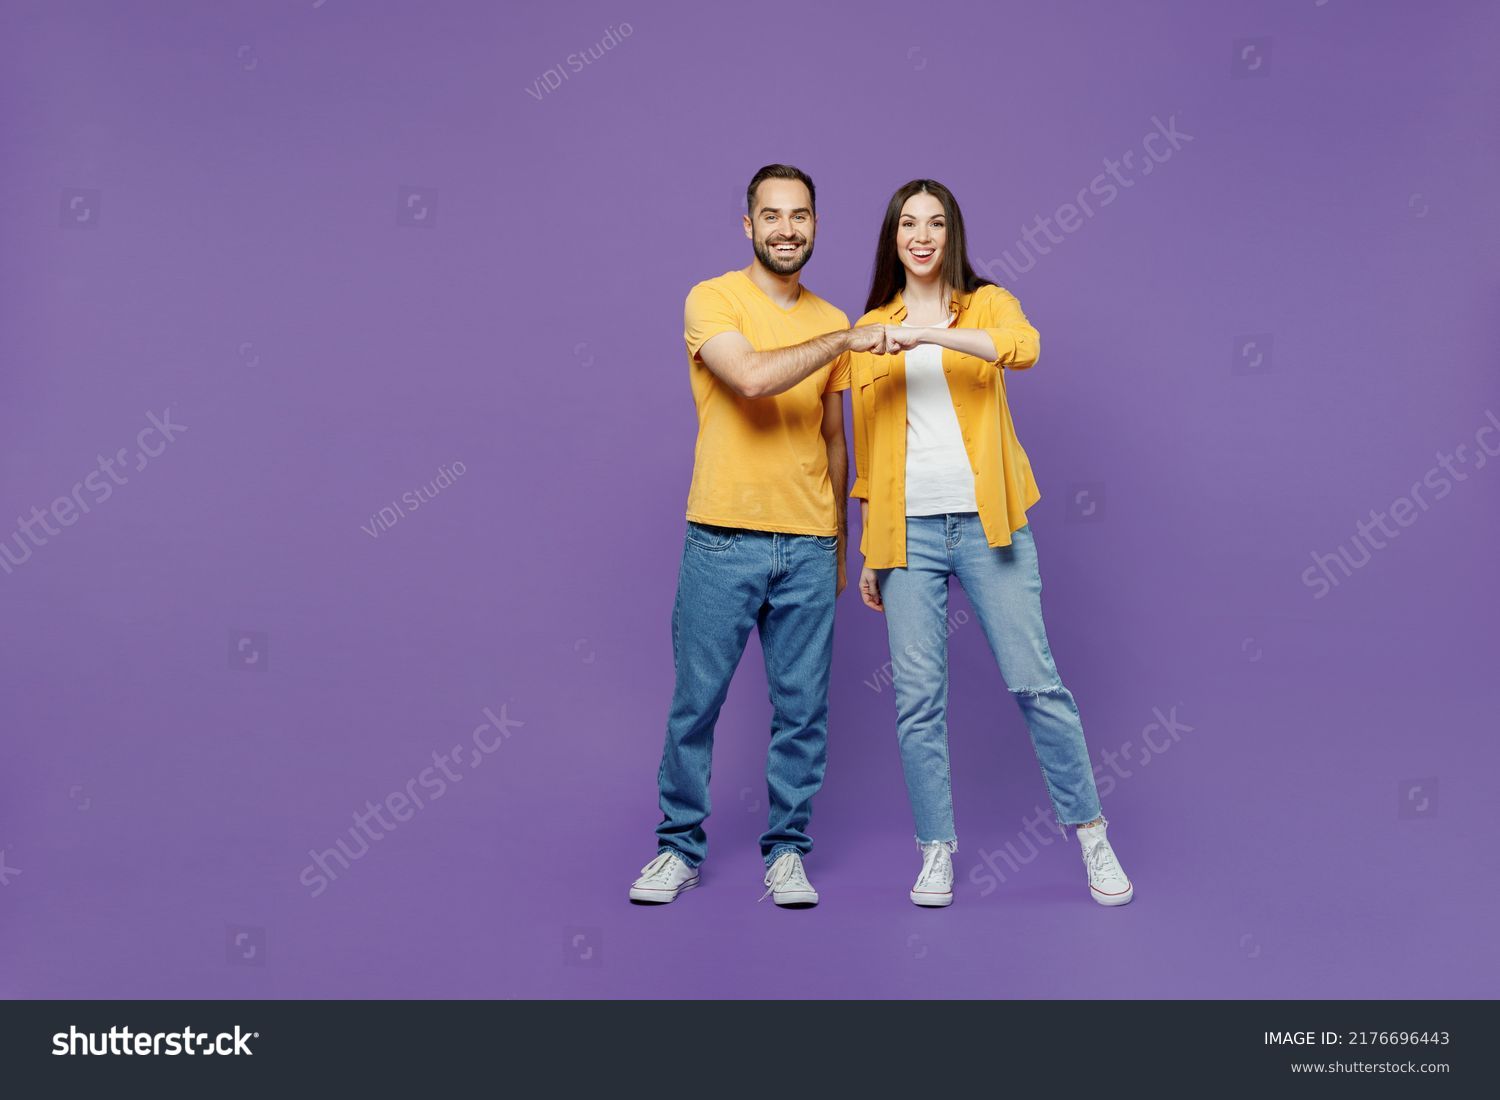 Full body young smiling happy couple two friends family man woman together in yellow casual clothes looking camera giving a fist bump in agreement isolated on plain violet background studio portrait #2176696443